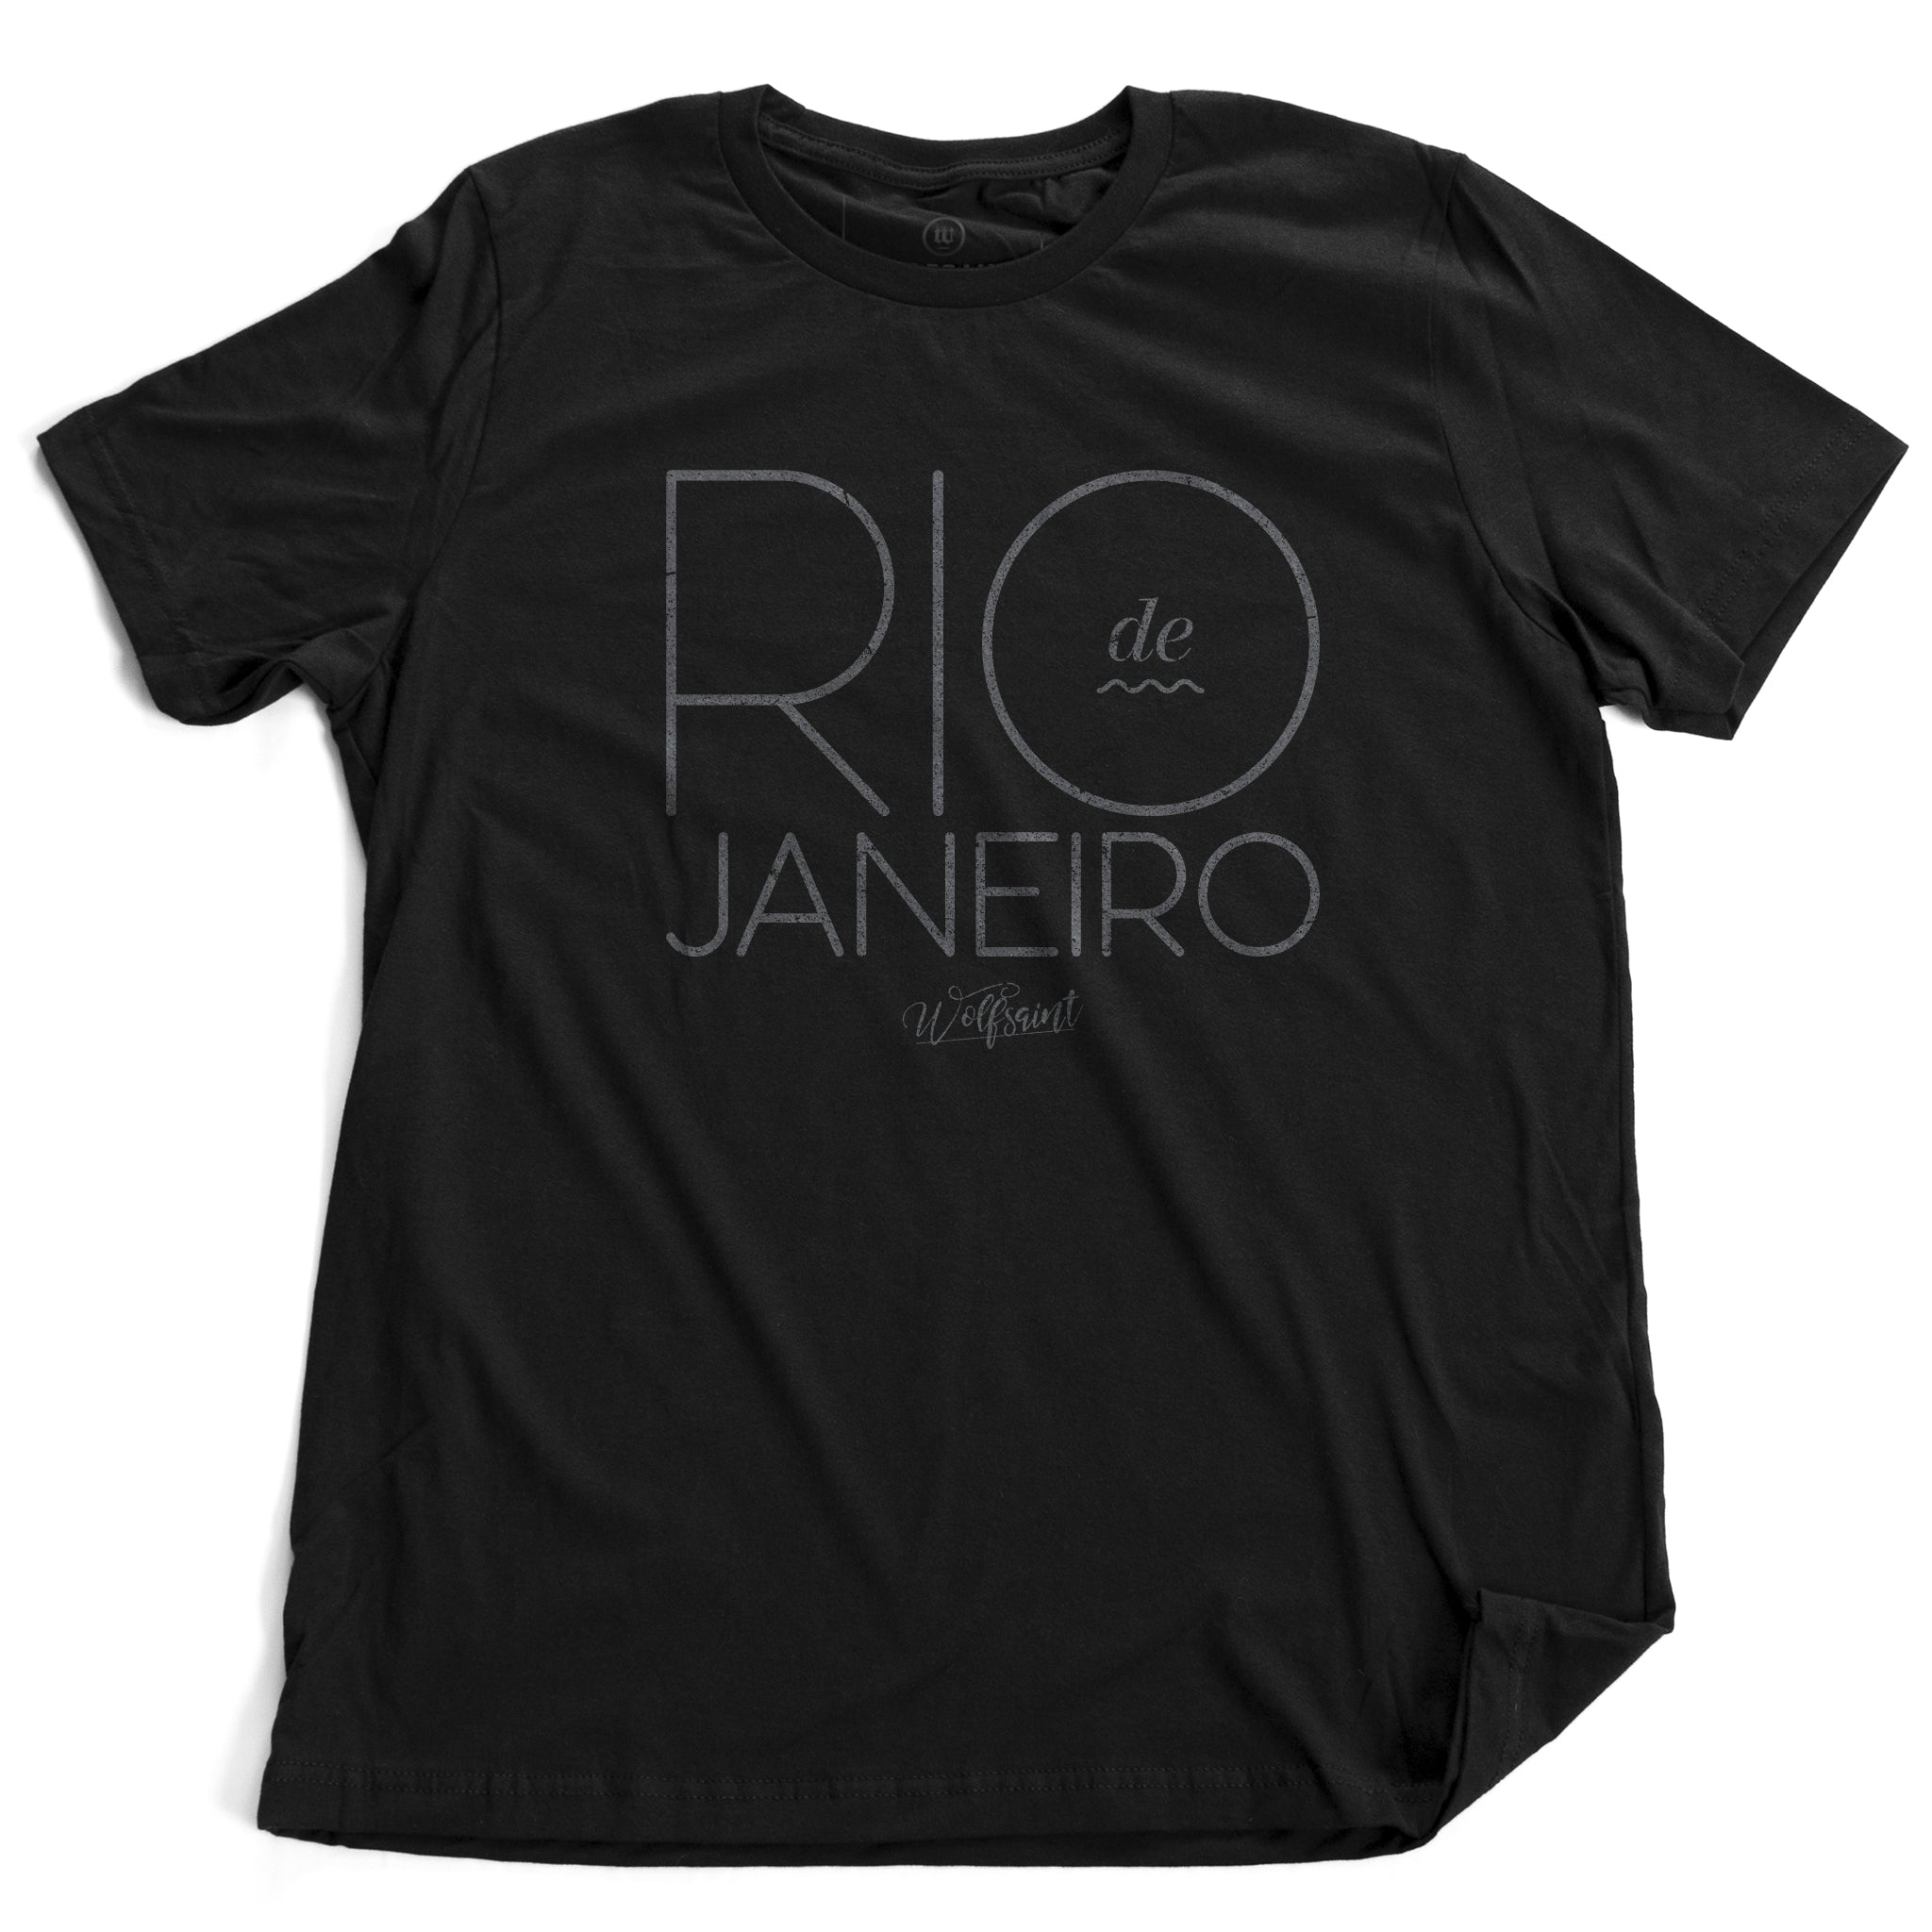 An elegant, retro design fashion t-shirt with RIO DE JANEIRO in large light gray typography in a thin font on Classic Black cotton. The Wolfsaint script logo is below. From Wolfsaint.net 